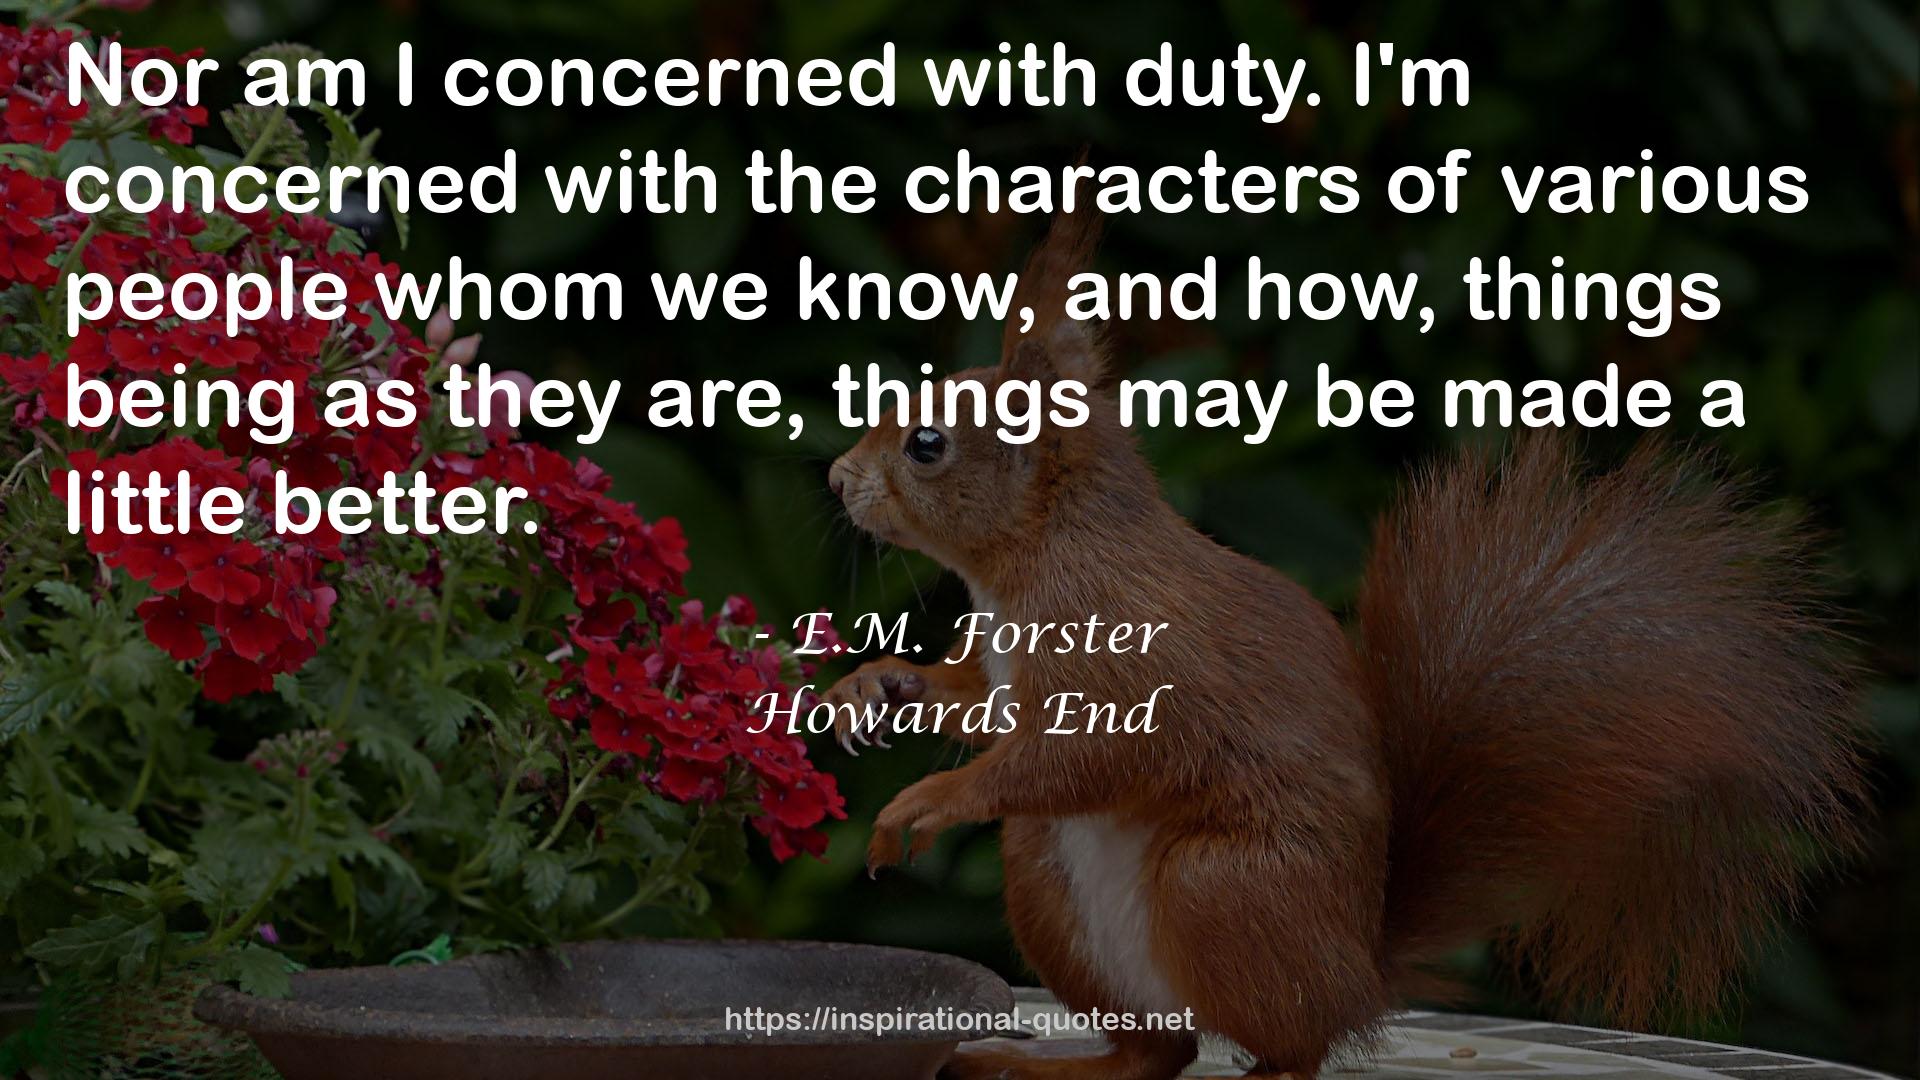 Howards End QUOTES